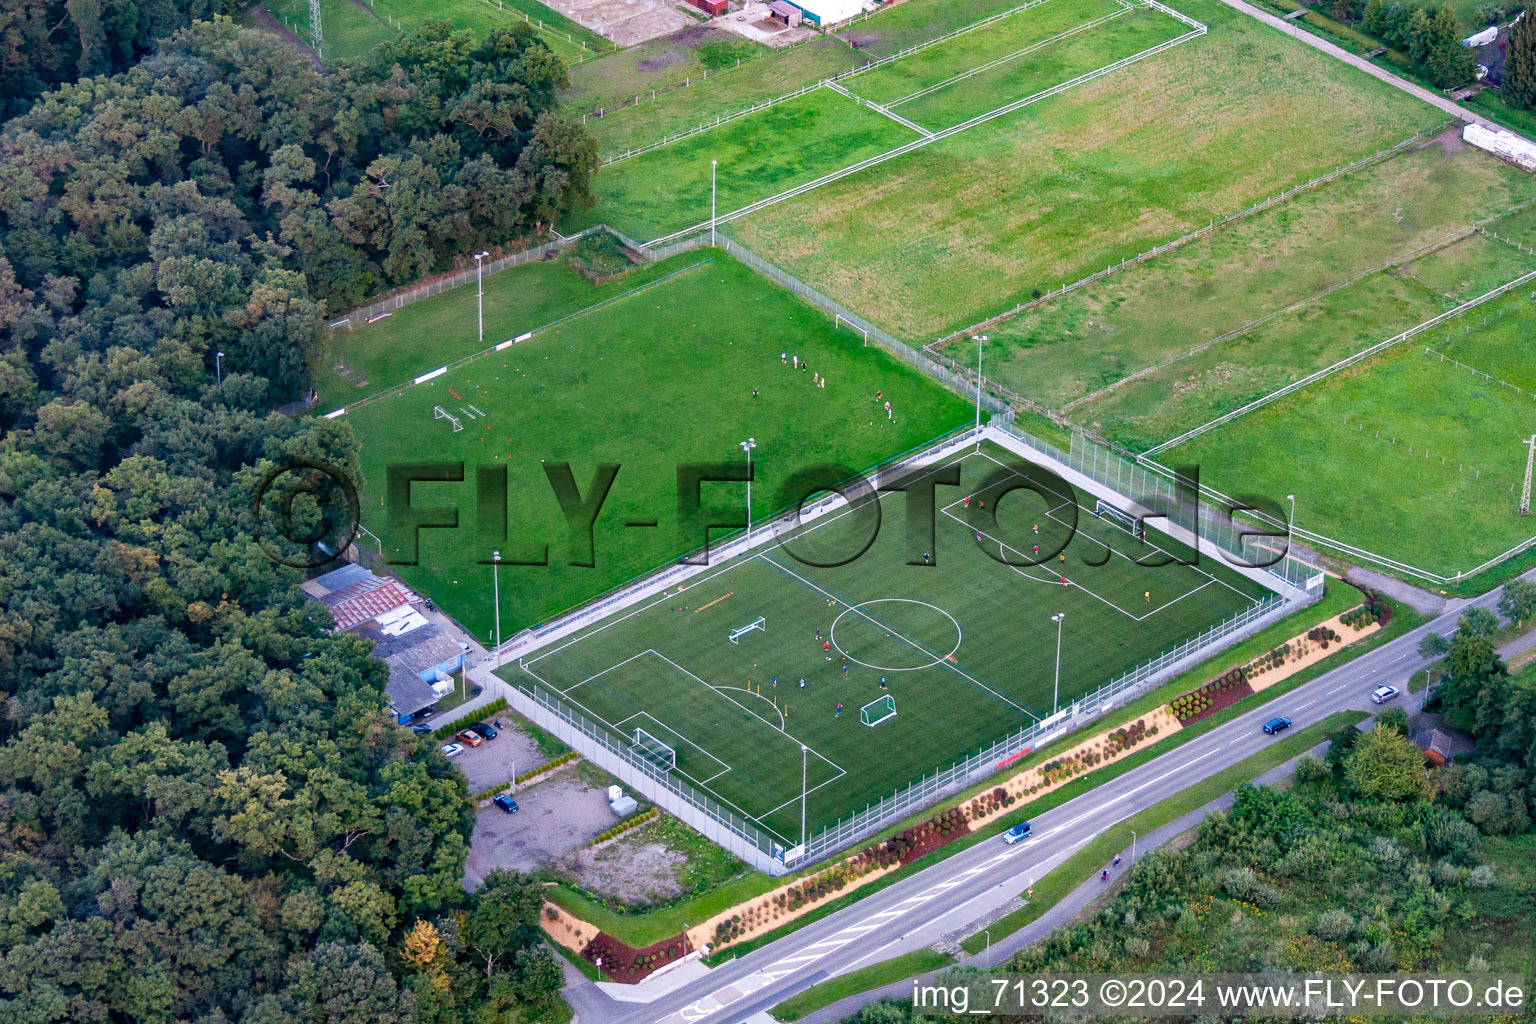 Sports fields in the district Minderslachen in Kandel in the state Rhineland-Palatinate, Germany